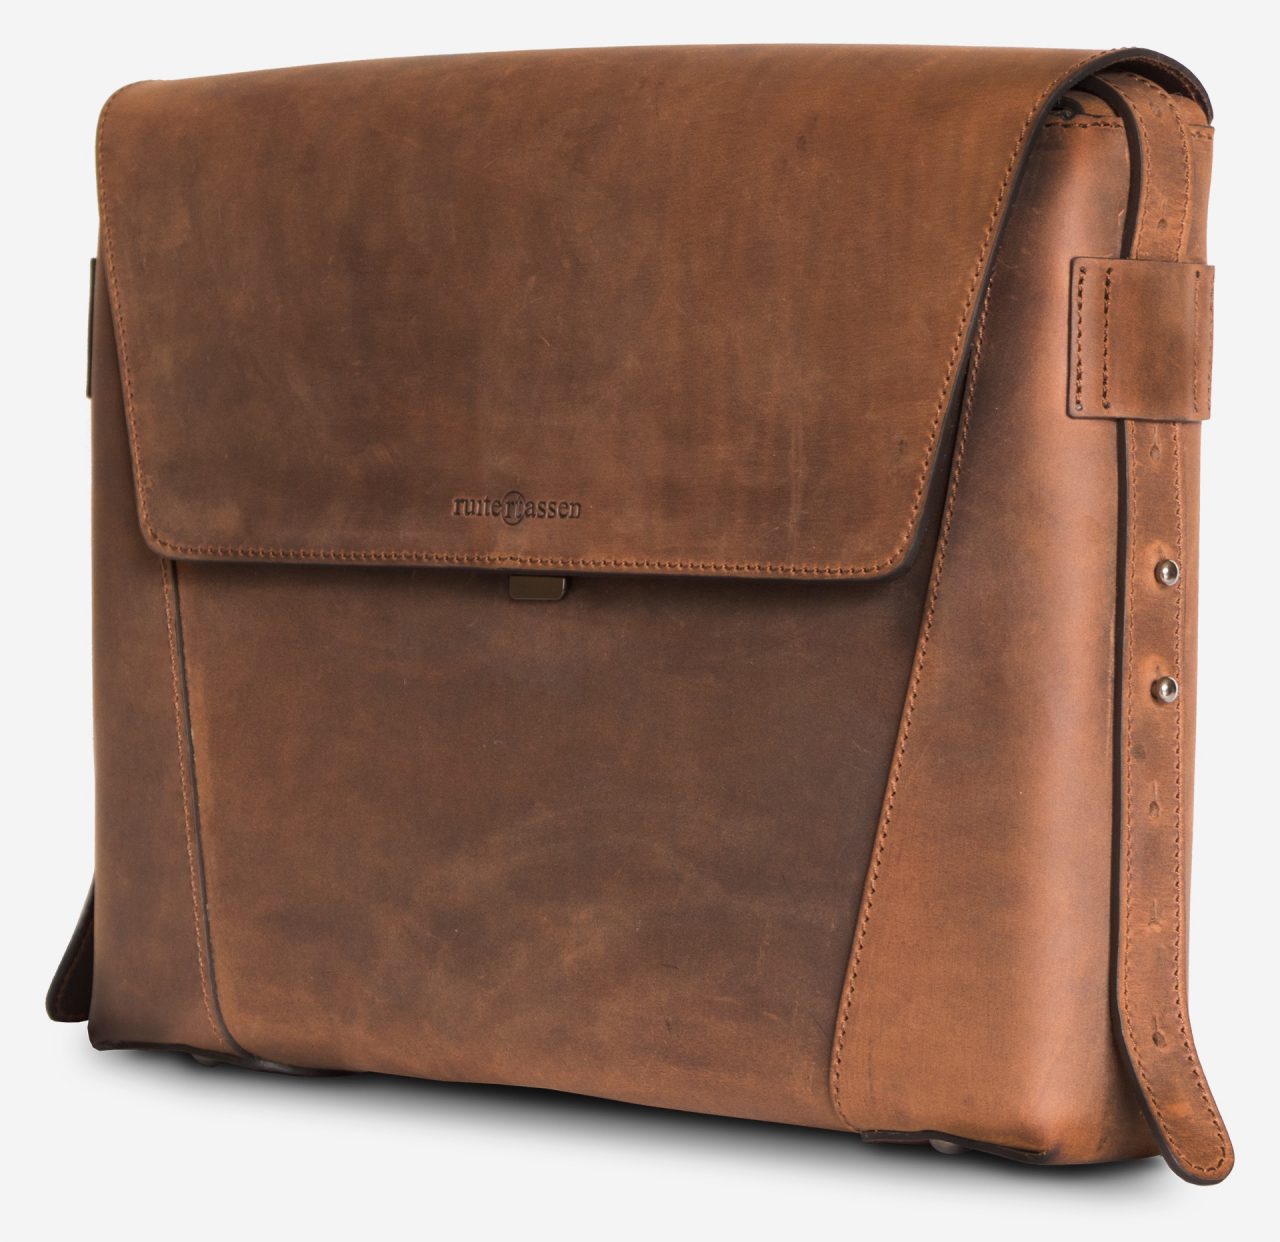 Side view of the slim vegetable-tanned brown leather briefcase bag.